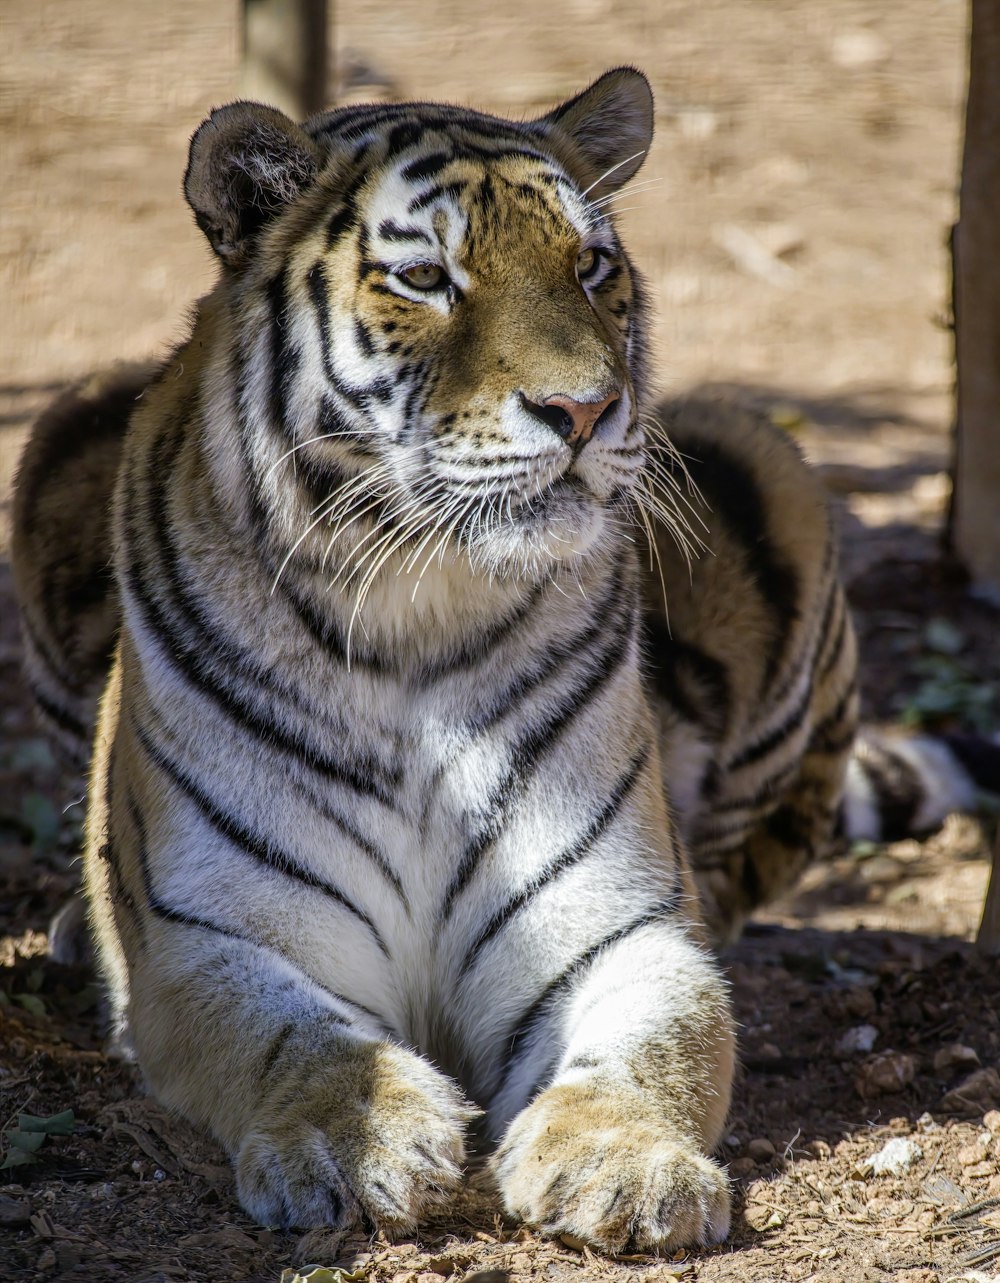 a tiger sitting on the ground in a zoo